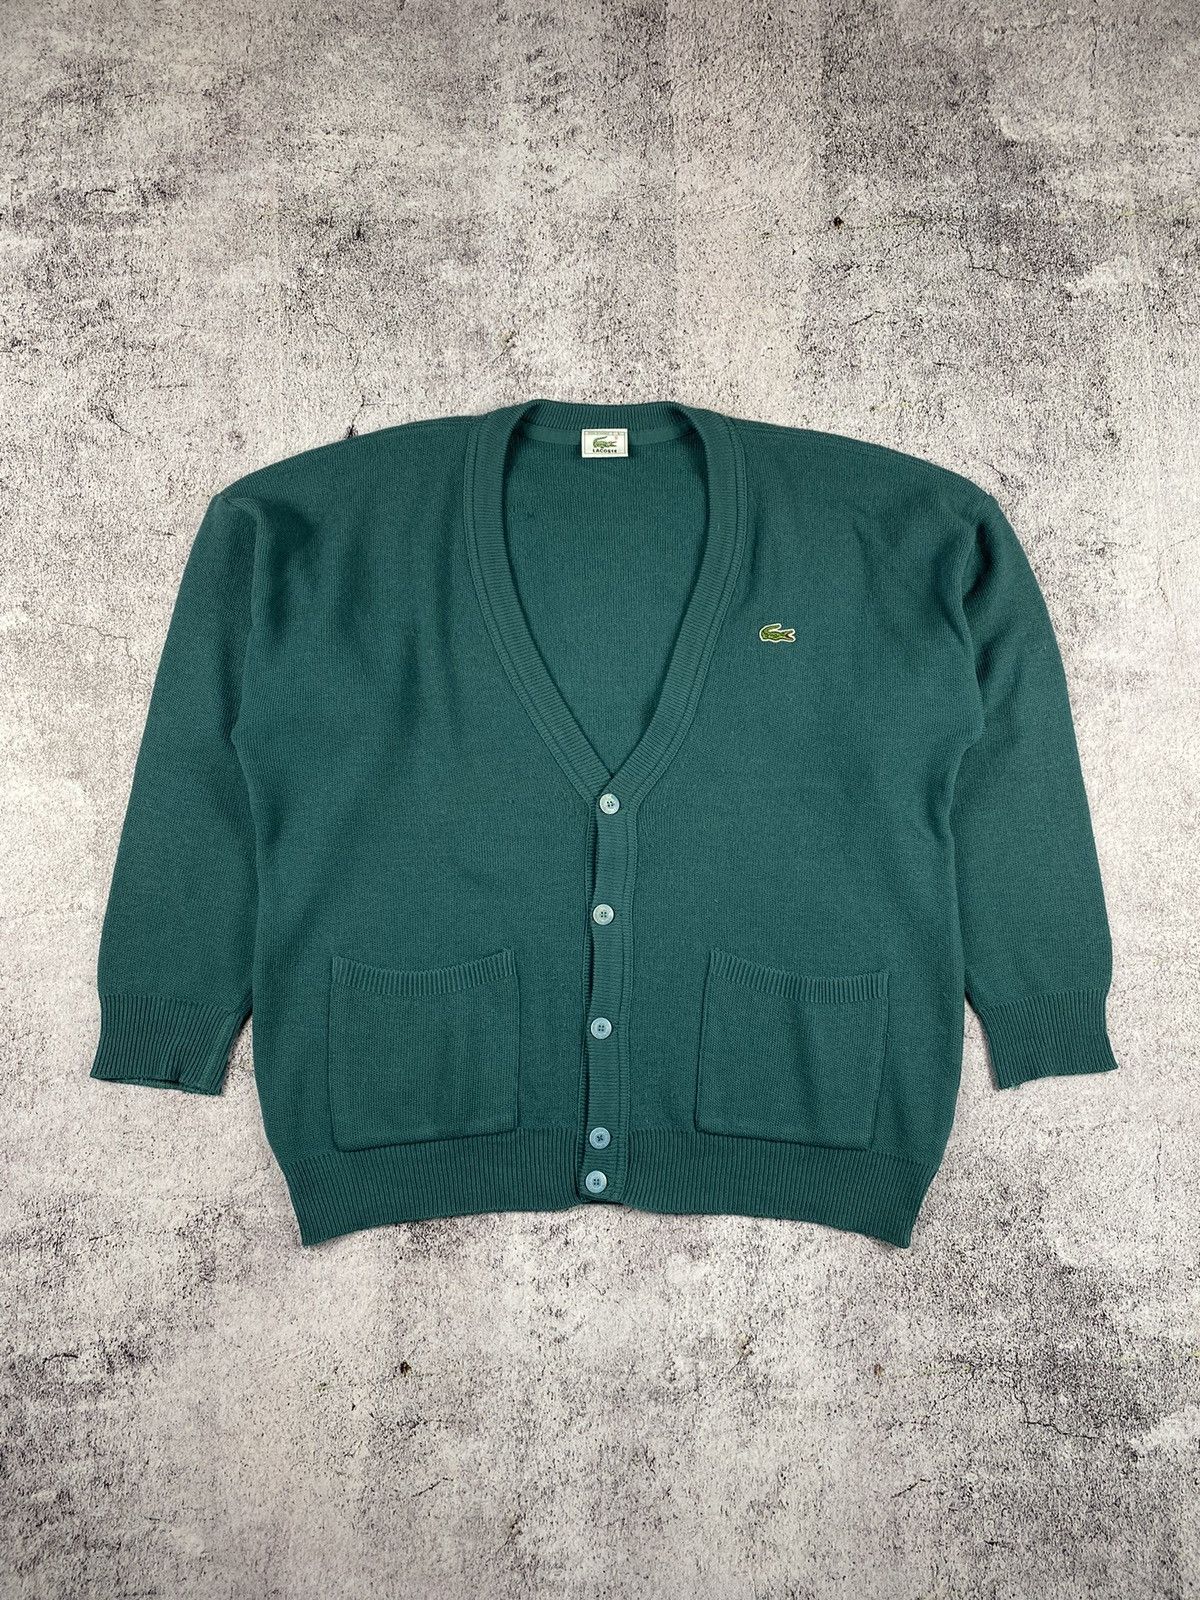 Vintage Vintage 90s Lacoste button up wool knit cardigan sweater | Grailed